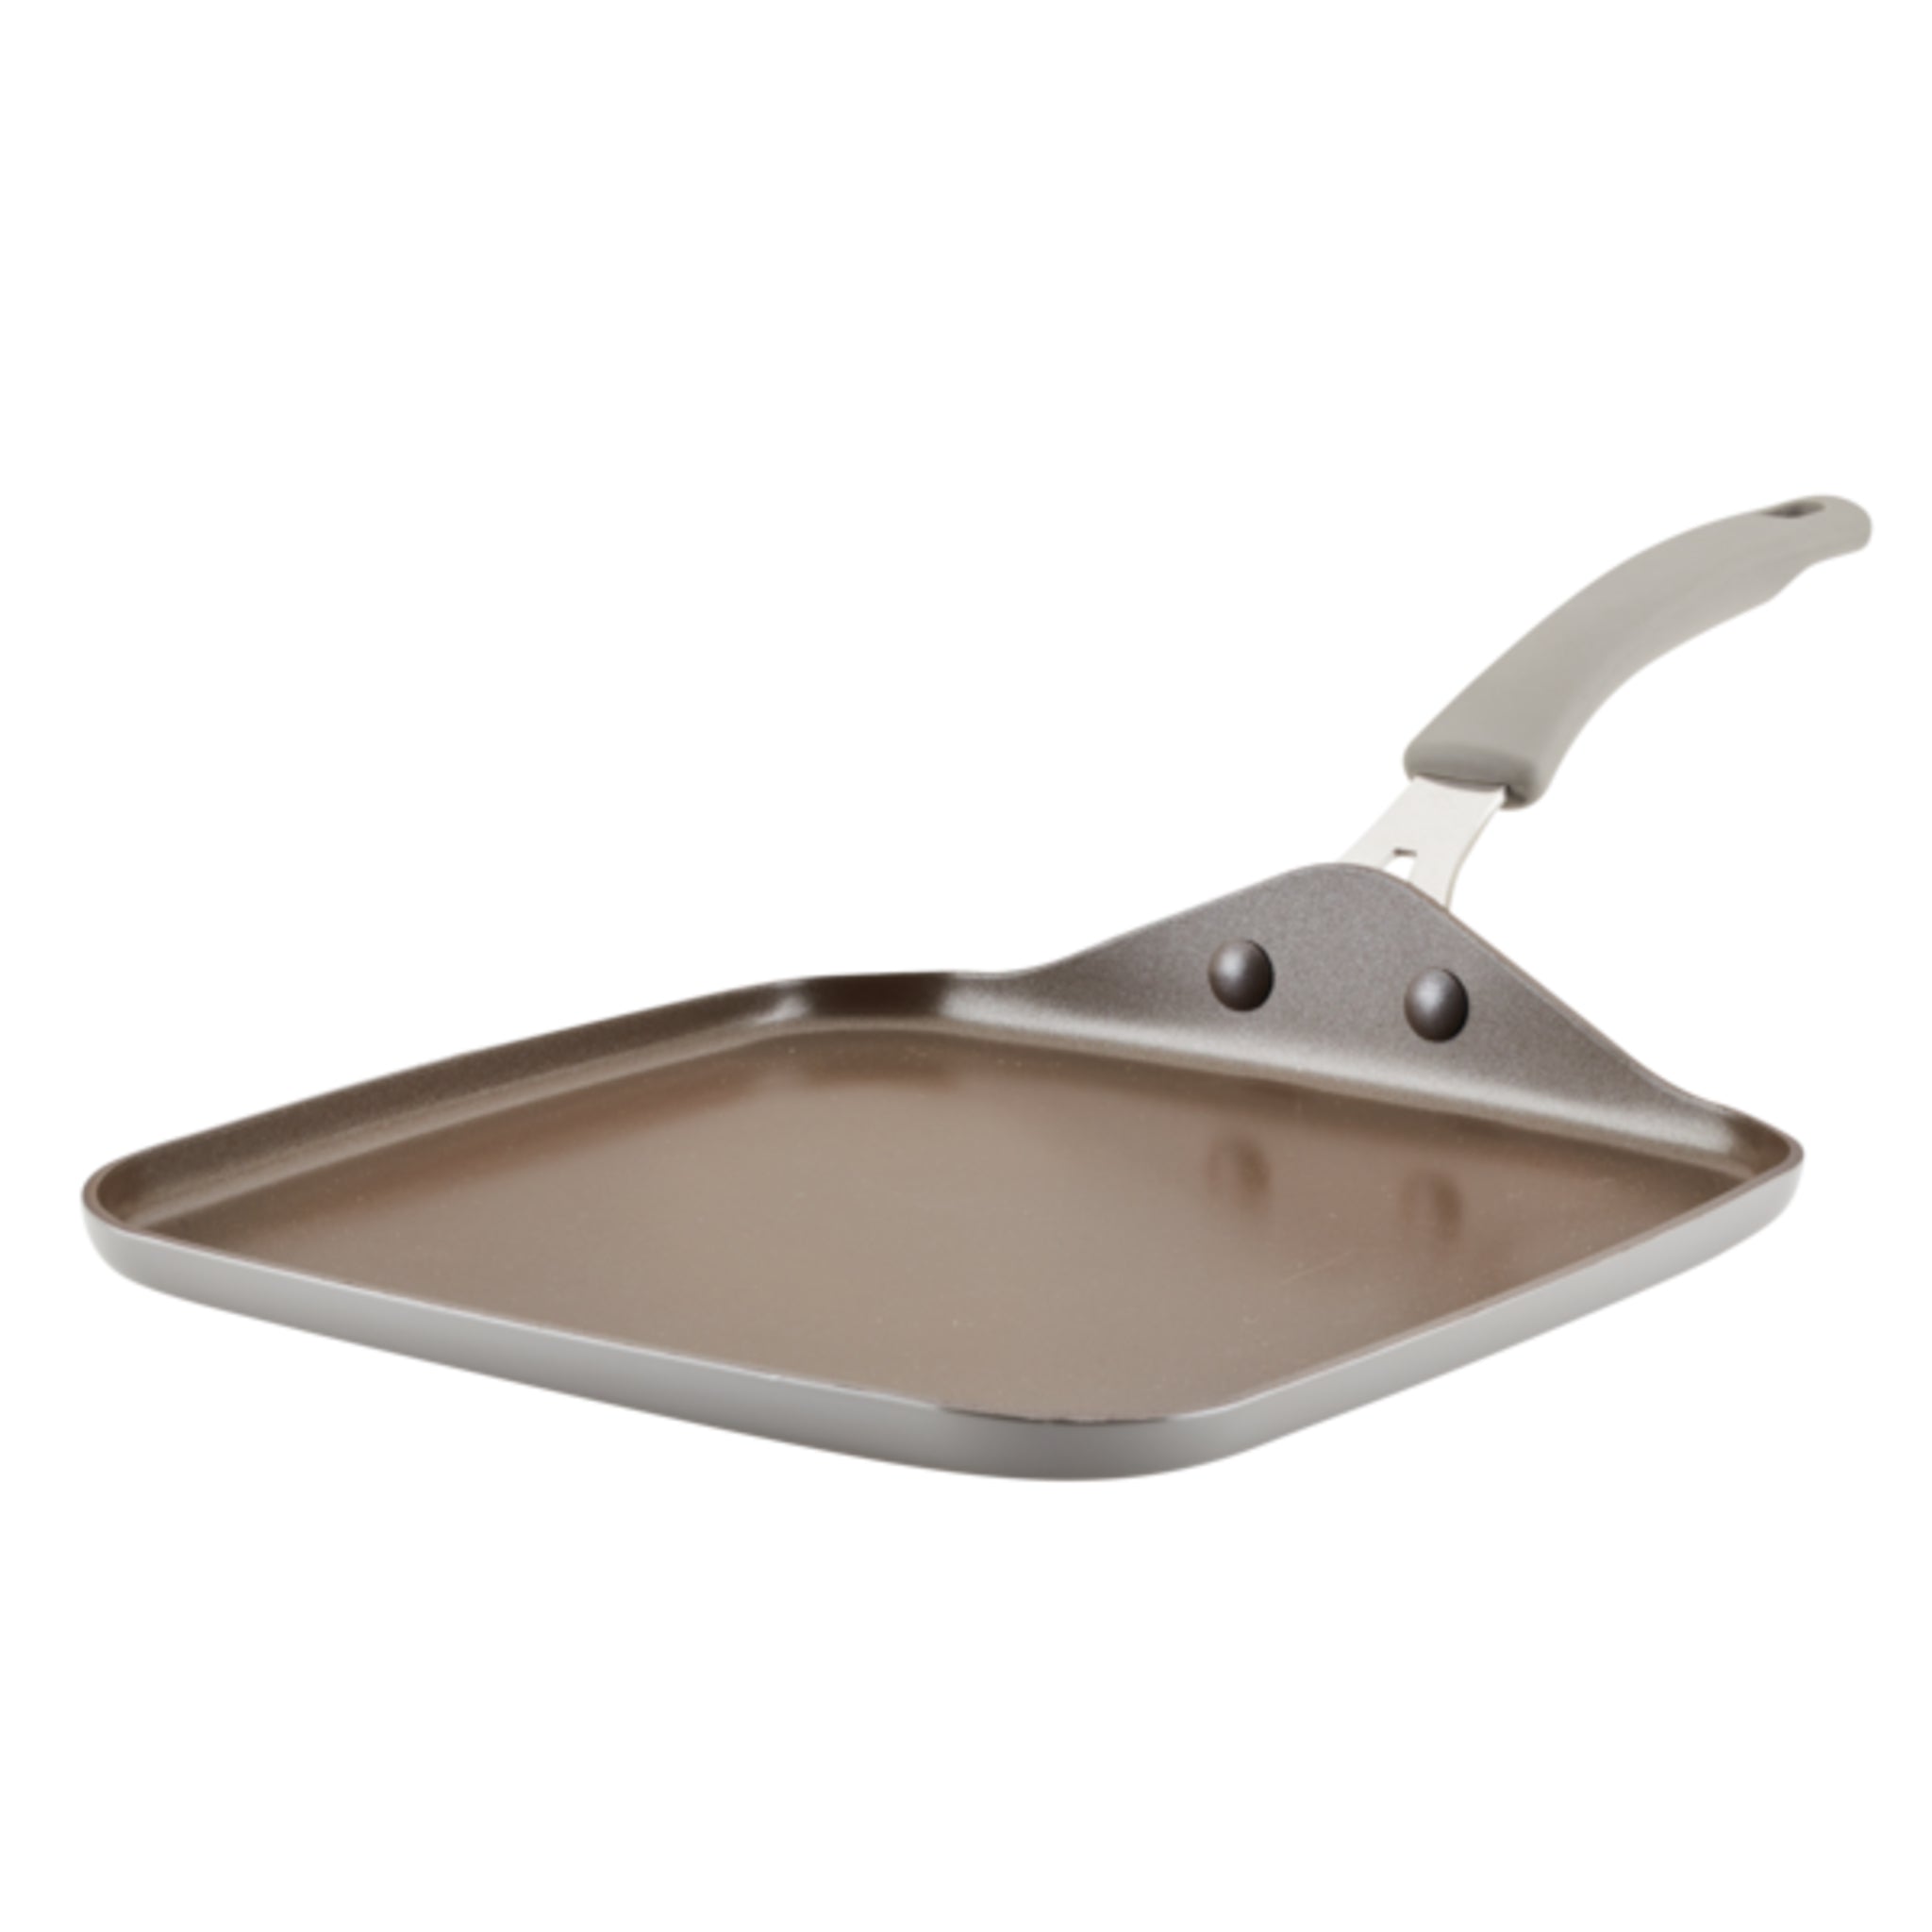 11-Inch Nonstick Square Griddle Pan